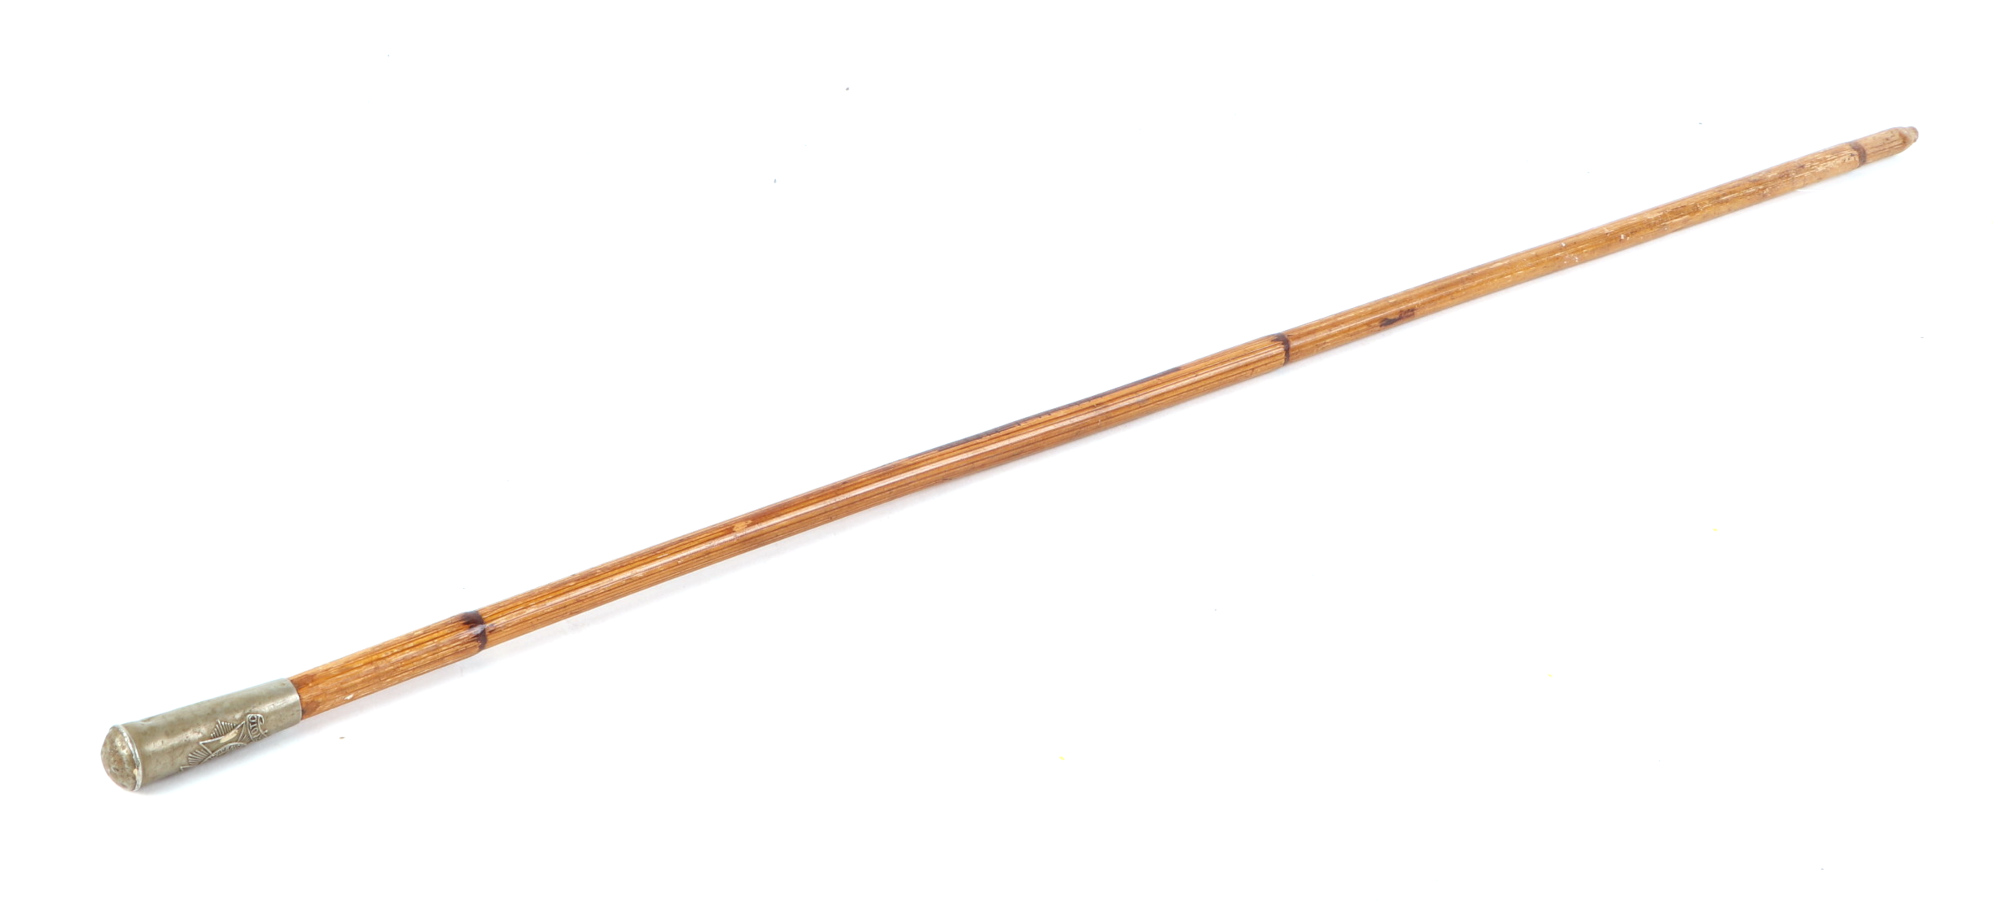 A Hailey Bury OTC bamboo military swagger stick, 70cm long. - Image 2 of 2